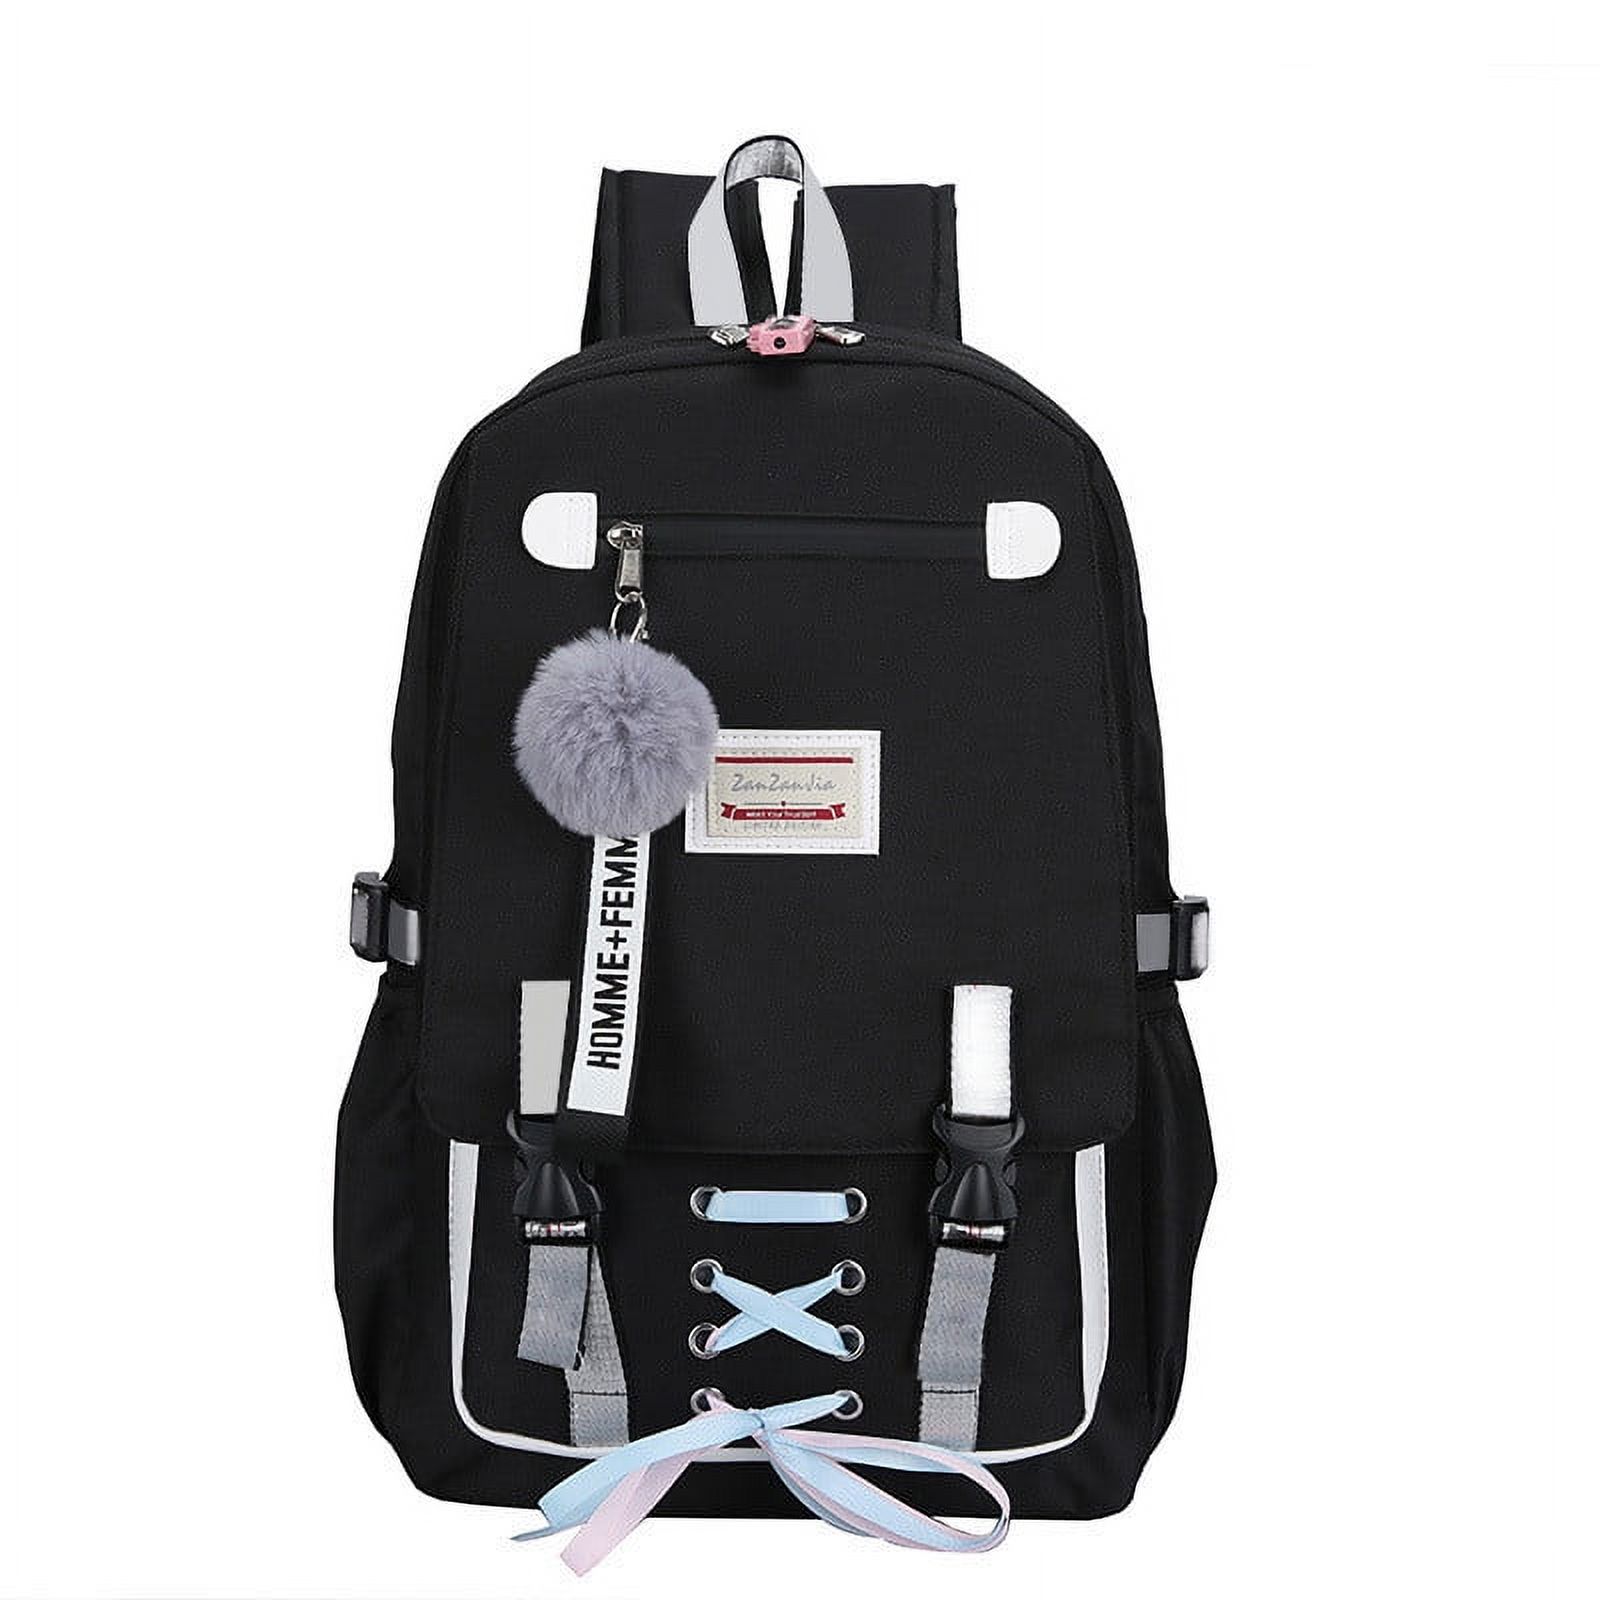 School Bags Large Bookbags for Teenage Girls USB with Lock Anti Theft Backpack Women Book Bag Youth Leisure College - image 1 of 6